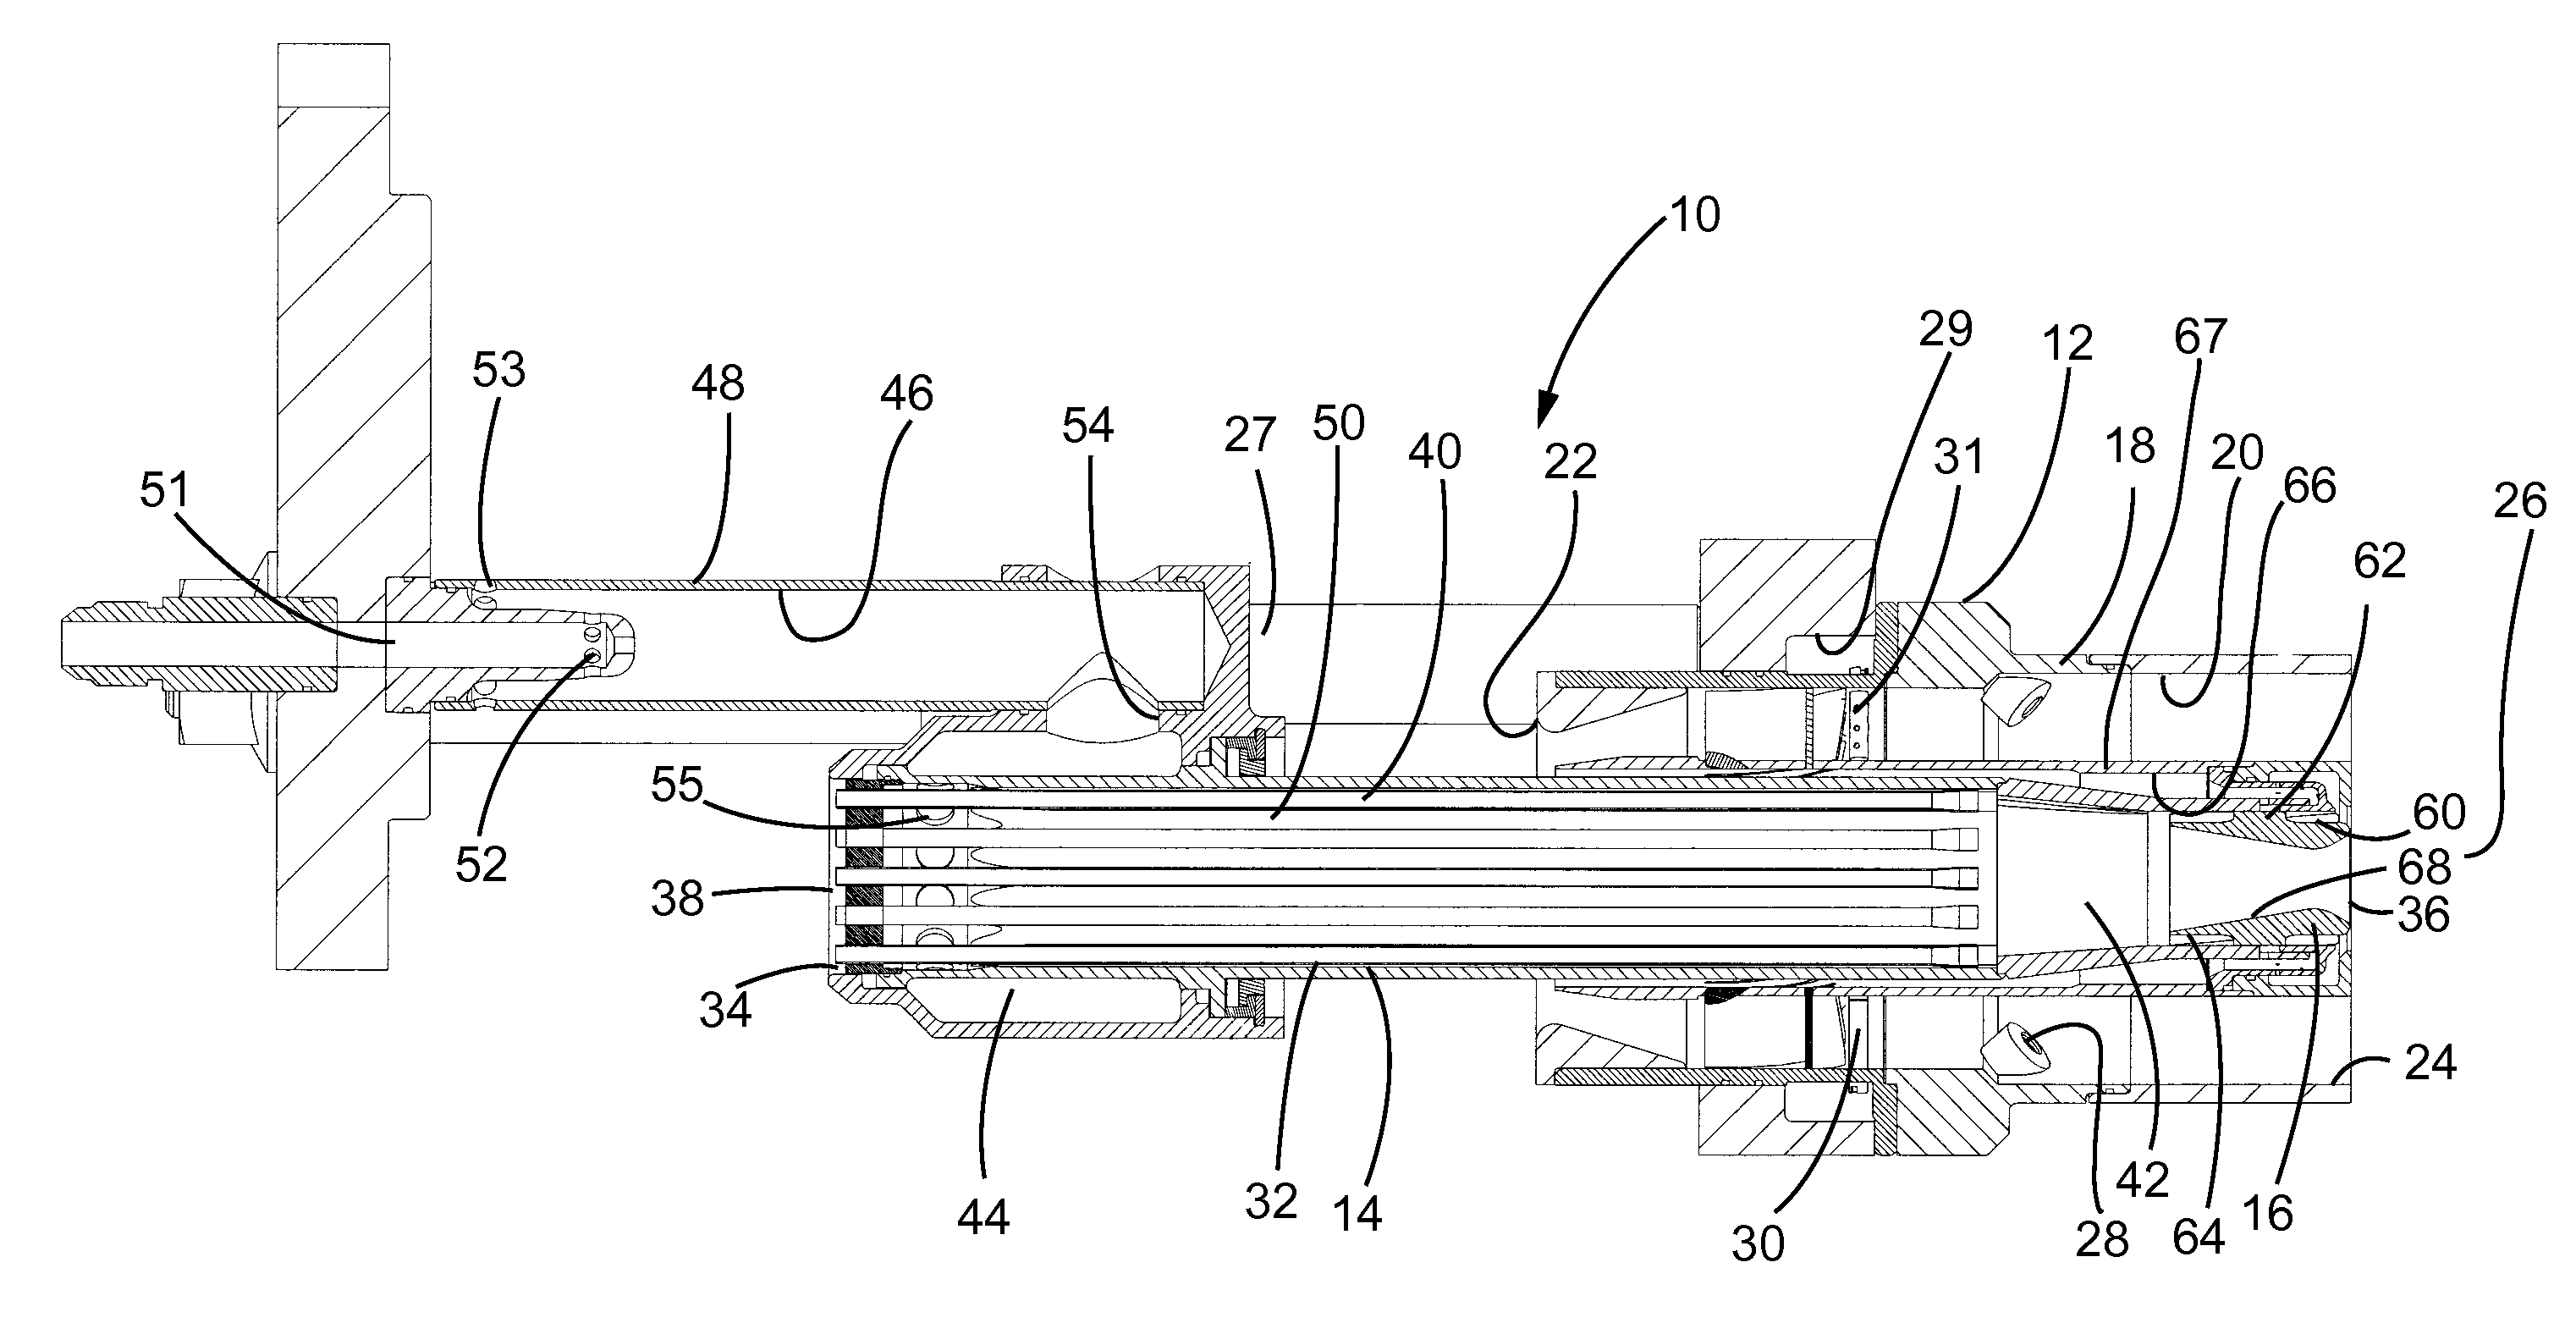 Flow conditioner for fuel injector for combustor and method for low-NOx combustor